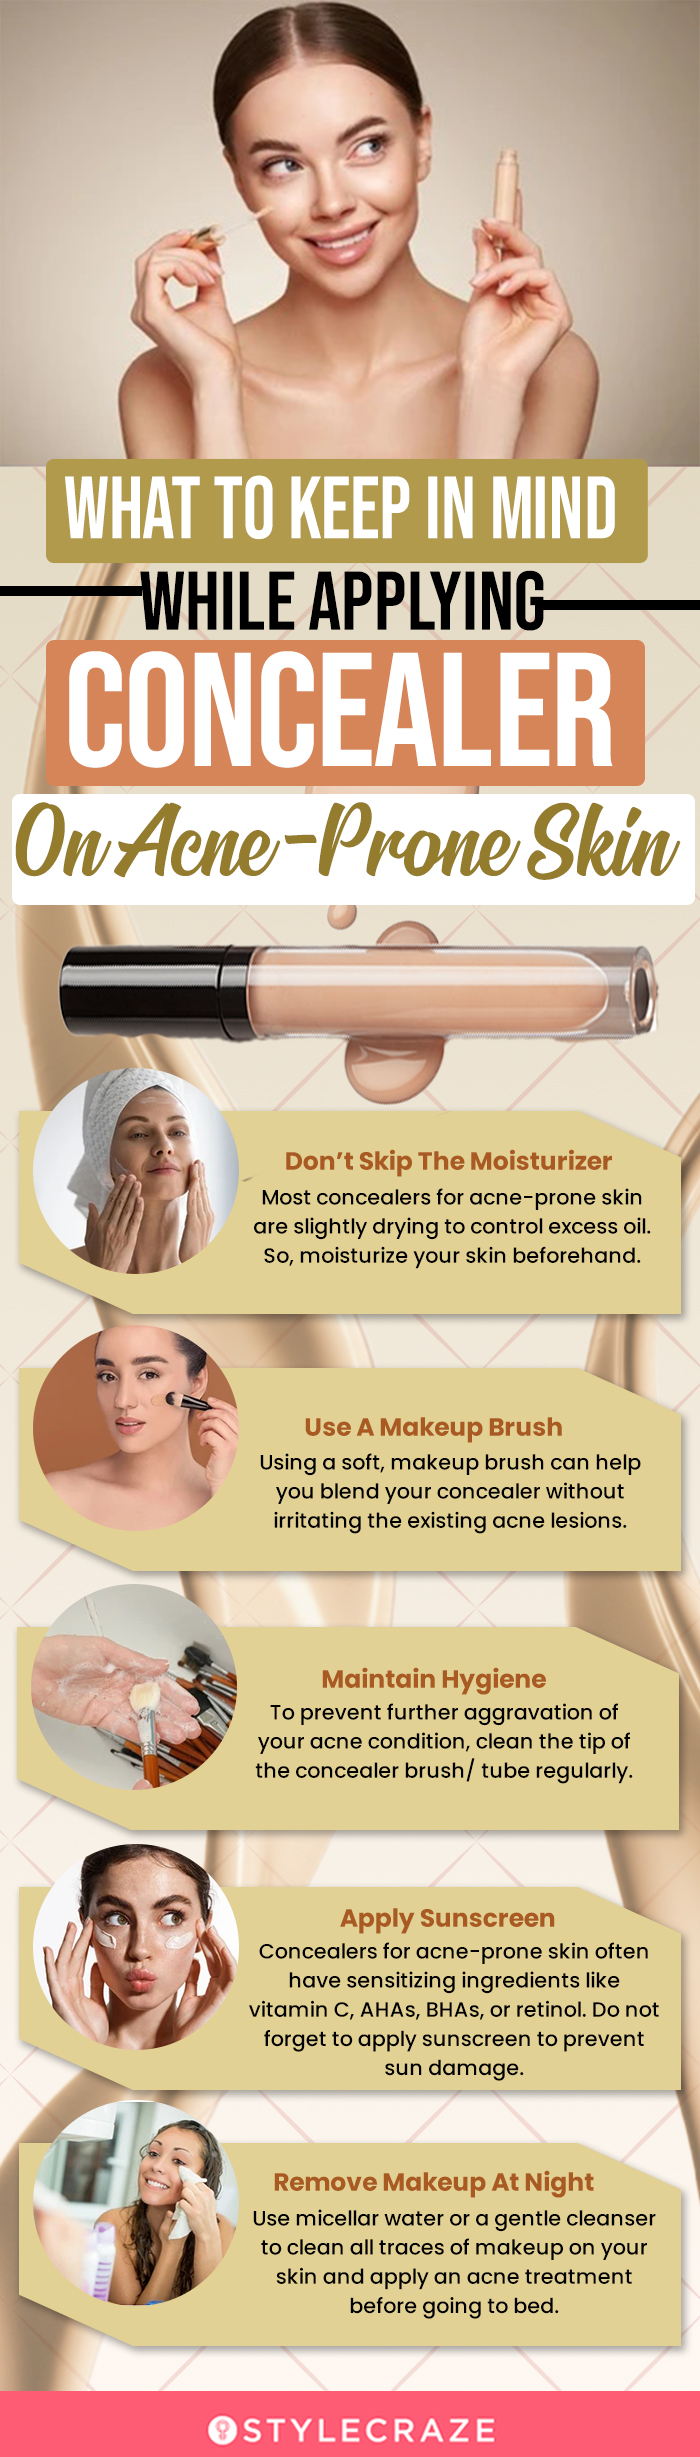 What To Keep In Mind While Applying Concealer On Acne-Prone Skin (infographic)